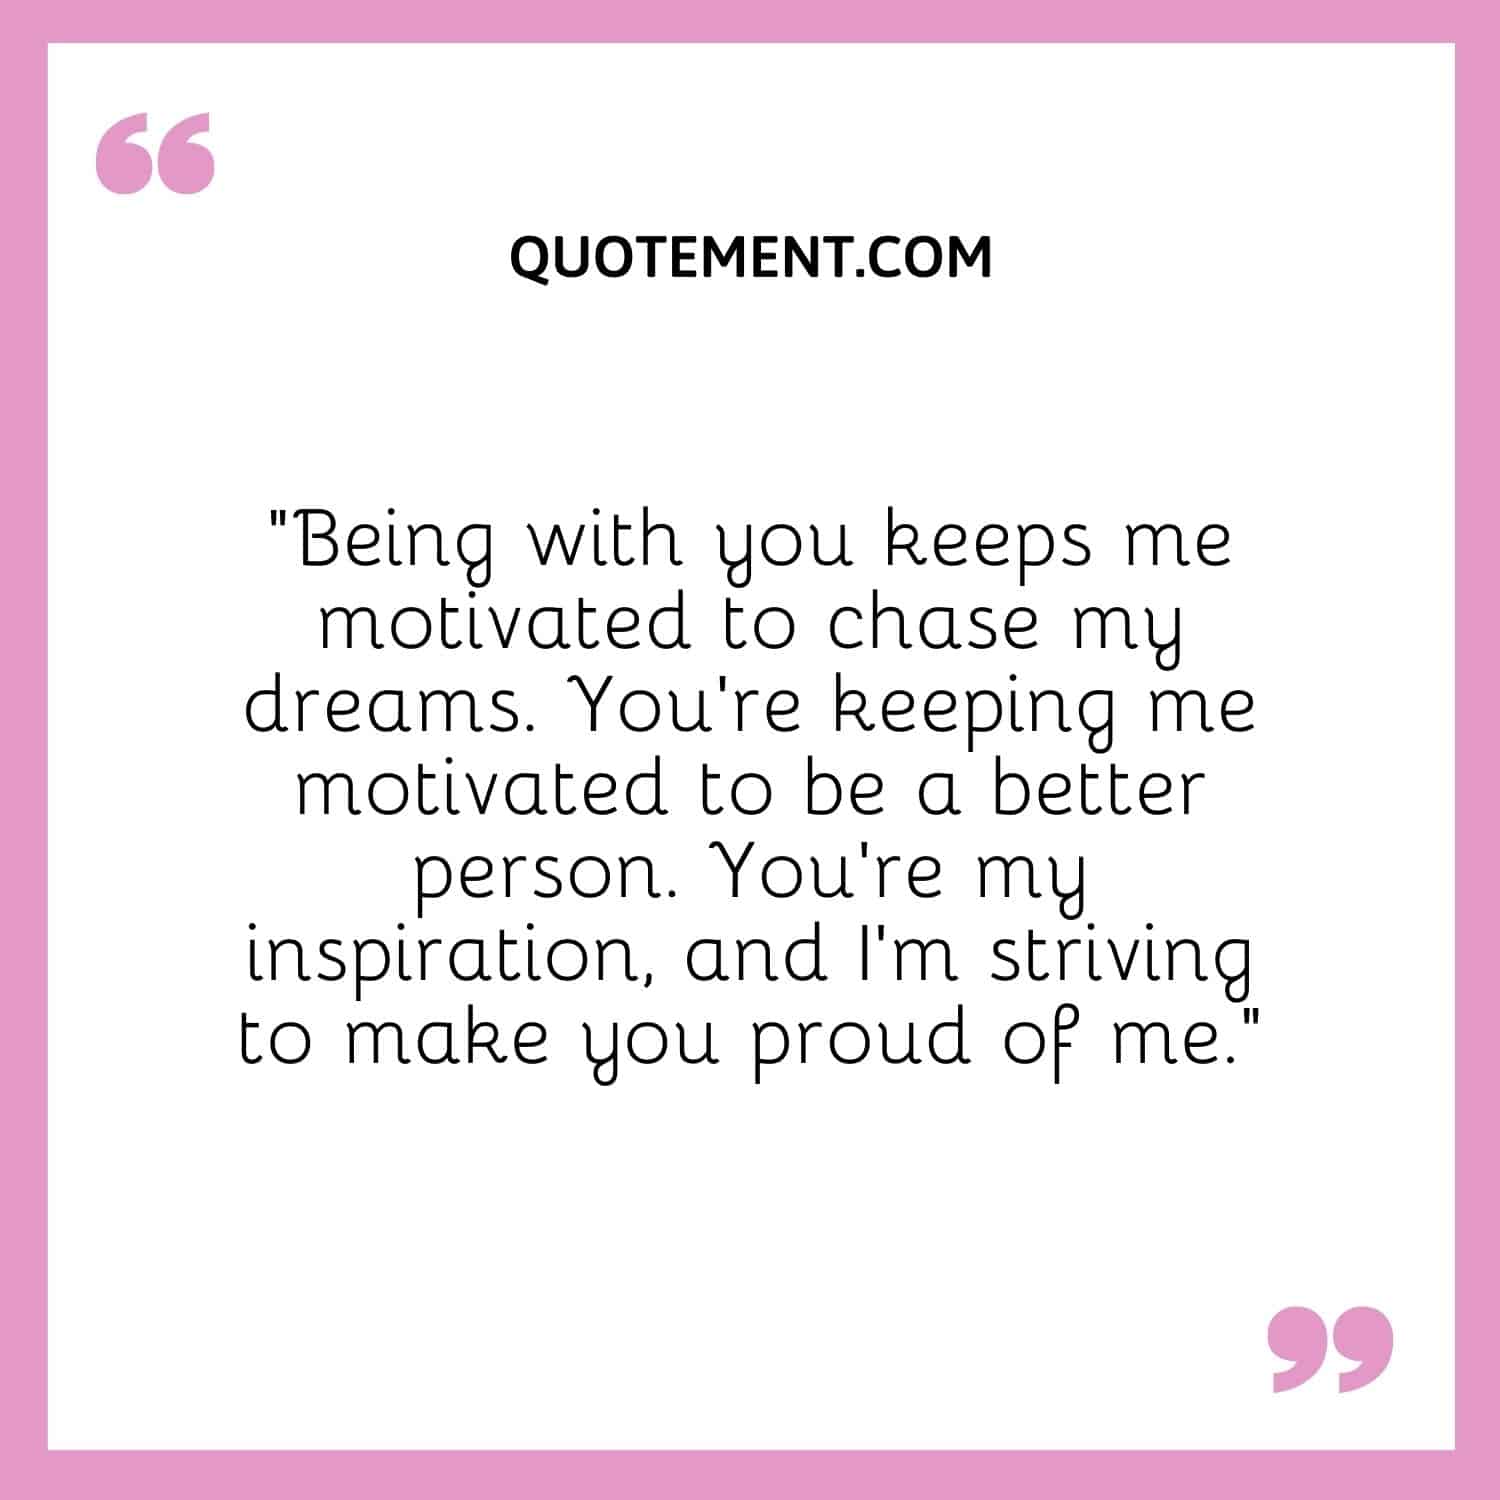 “Being with you keeps me motivated to chase my dreams. You're keeping me motivated to be a better person. You're my inspiration, and I'm striving to make you proud of me.”